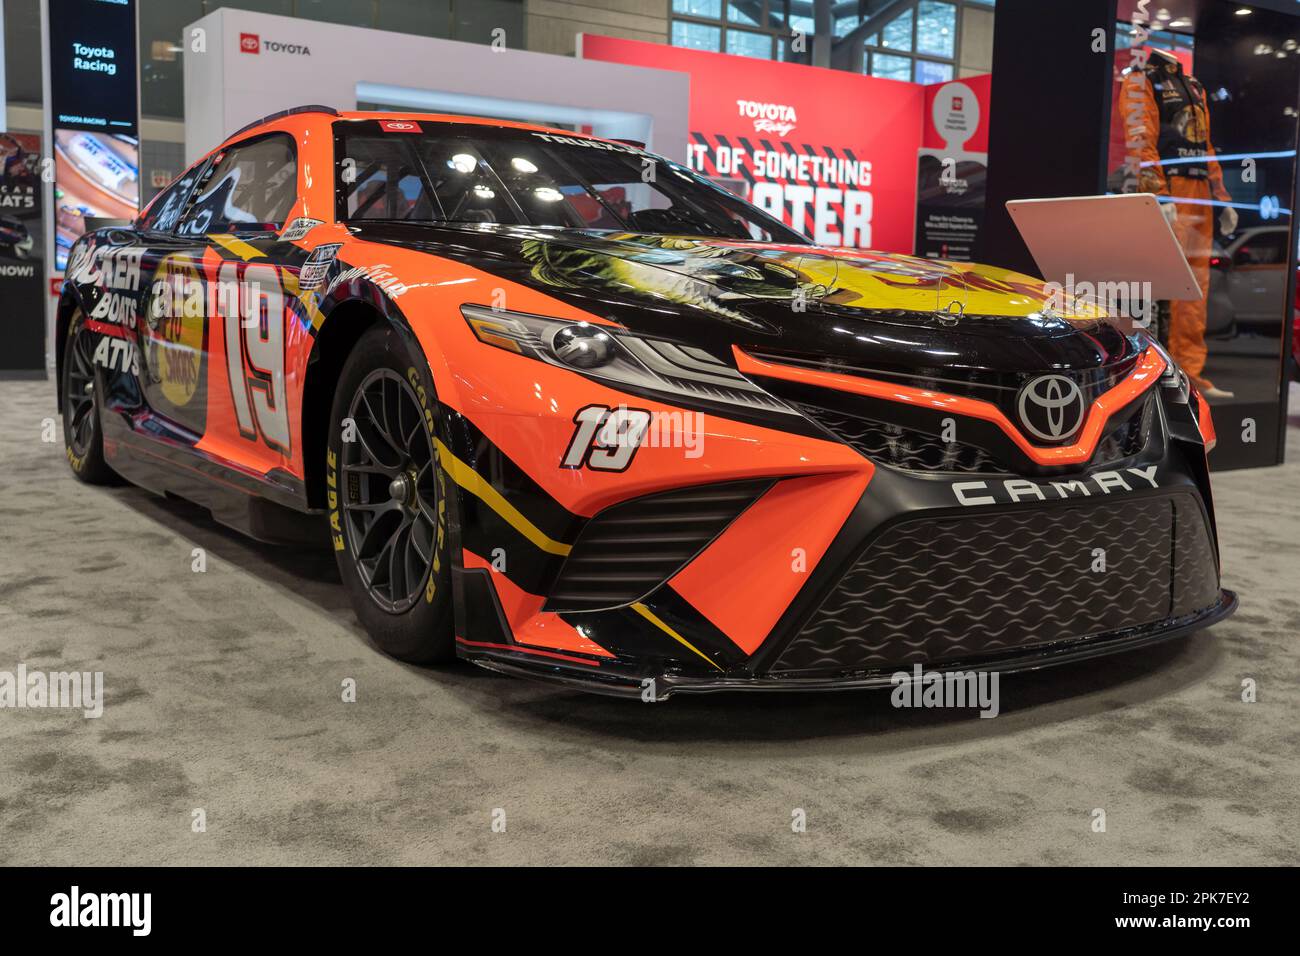 New York, United States. 05th Apr, 2023. NEW YORK, NEW YORK - APRIL 05: A Joe Gibbs Racing #19 Camry Cup Car driven by Martin Truex Jr. seen at the International Auto Show press preview at the Jacob Javits Convention Center on April 5, 2023 in New York City. Credit: SOPA Images Limited/Alamy Live News Stock Photo